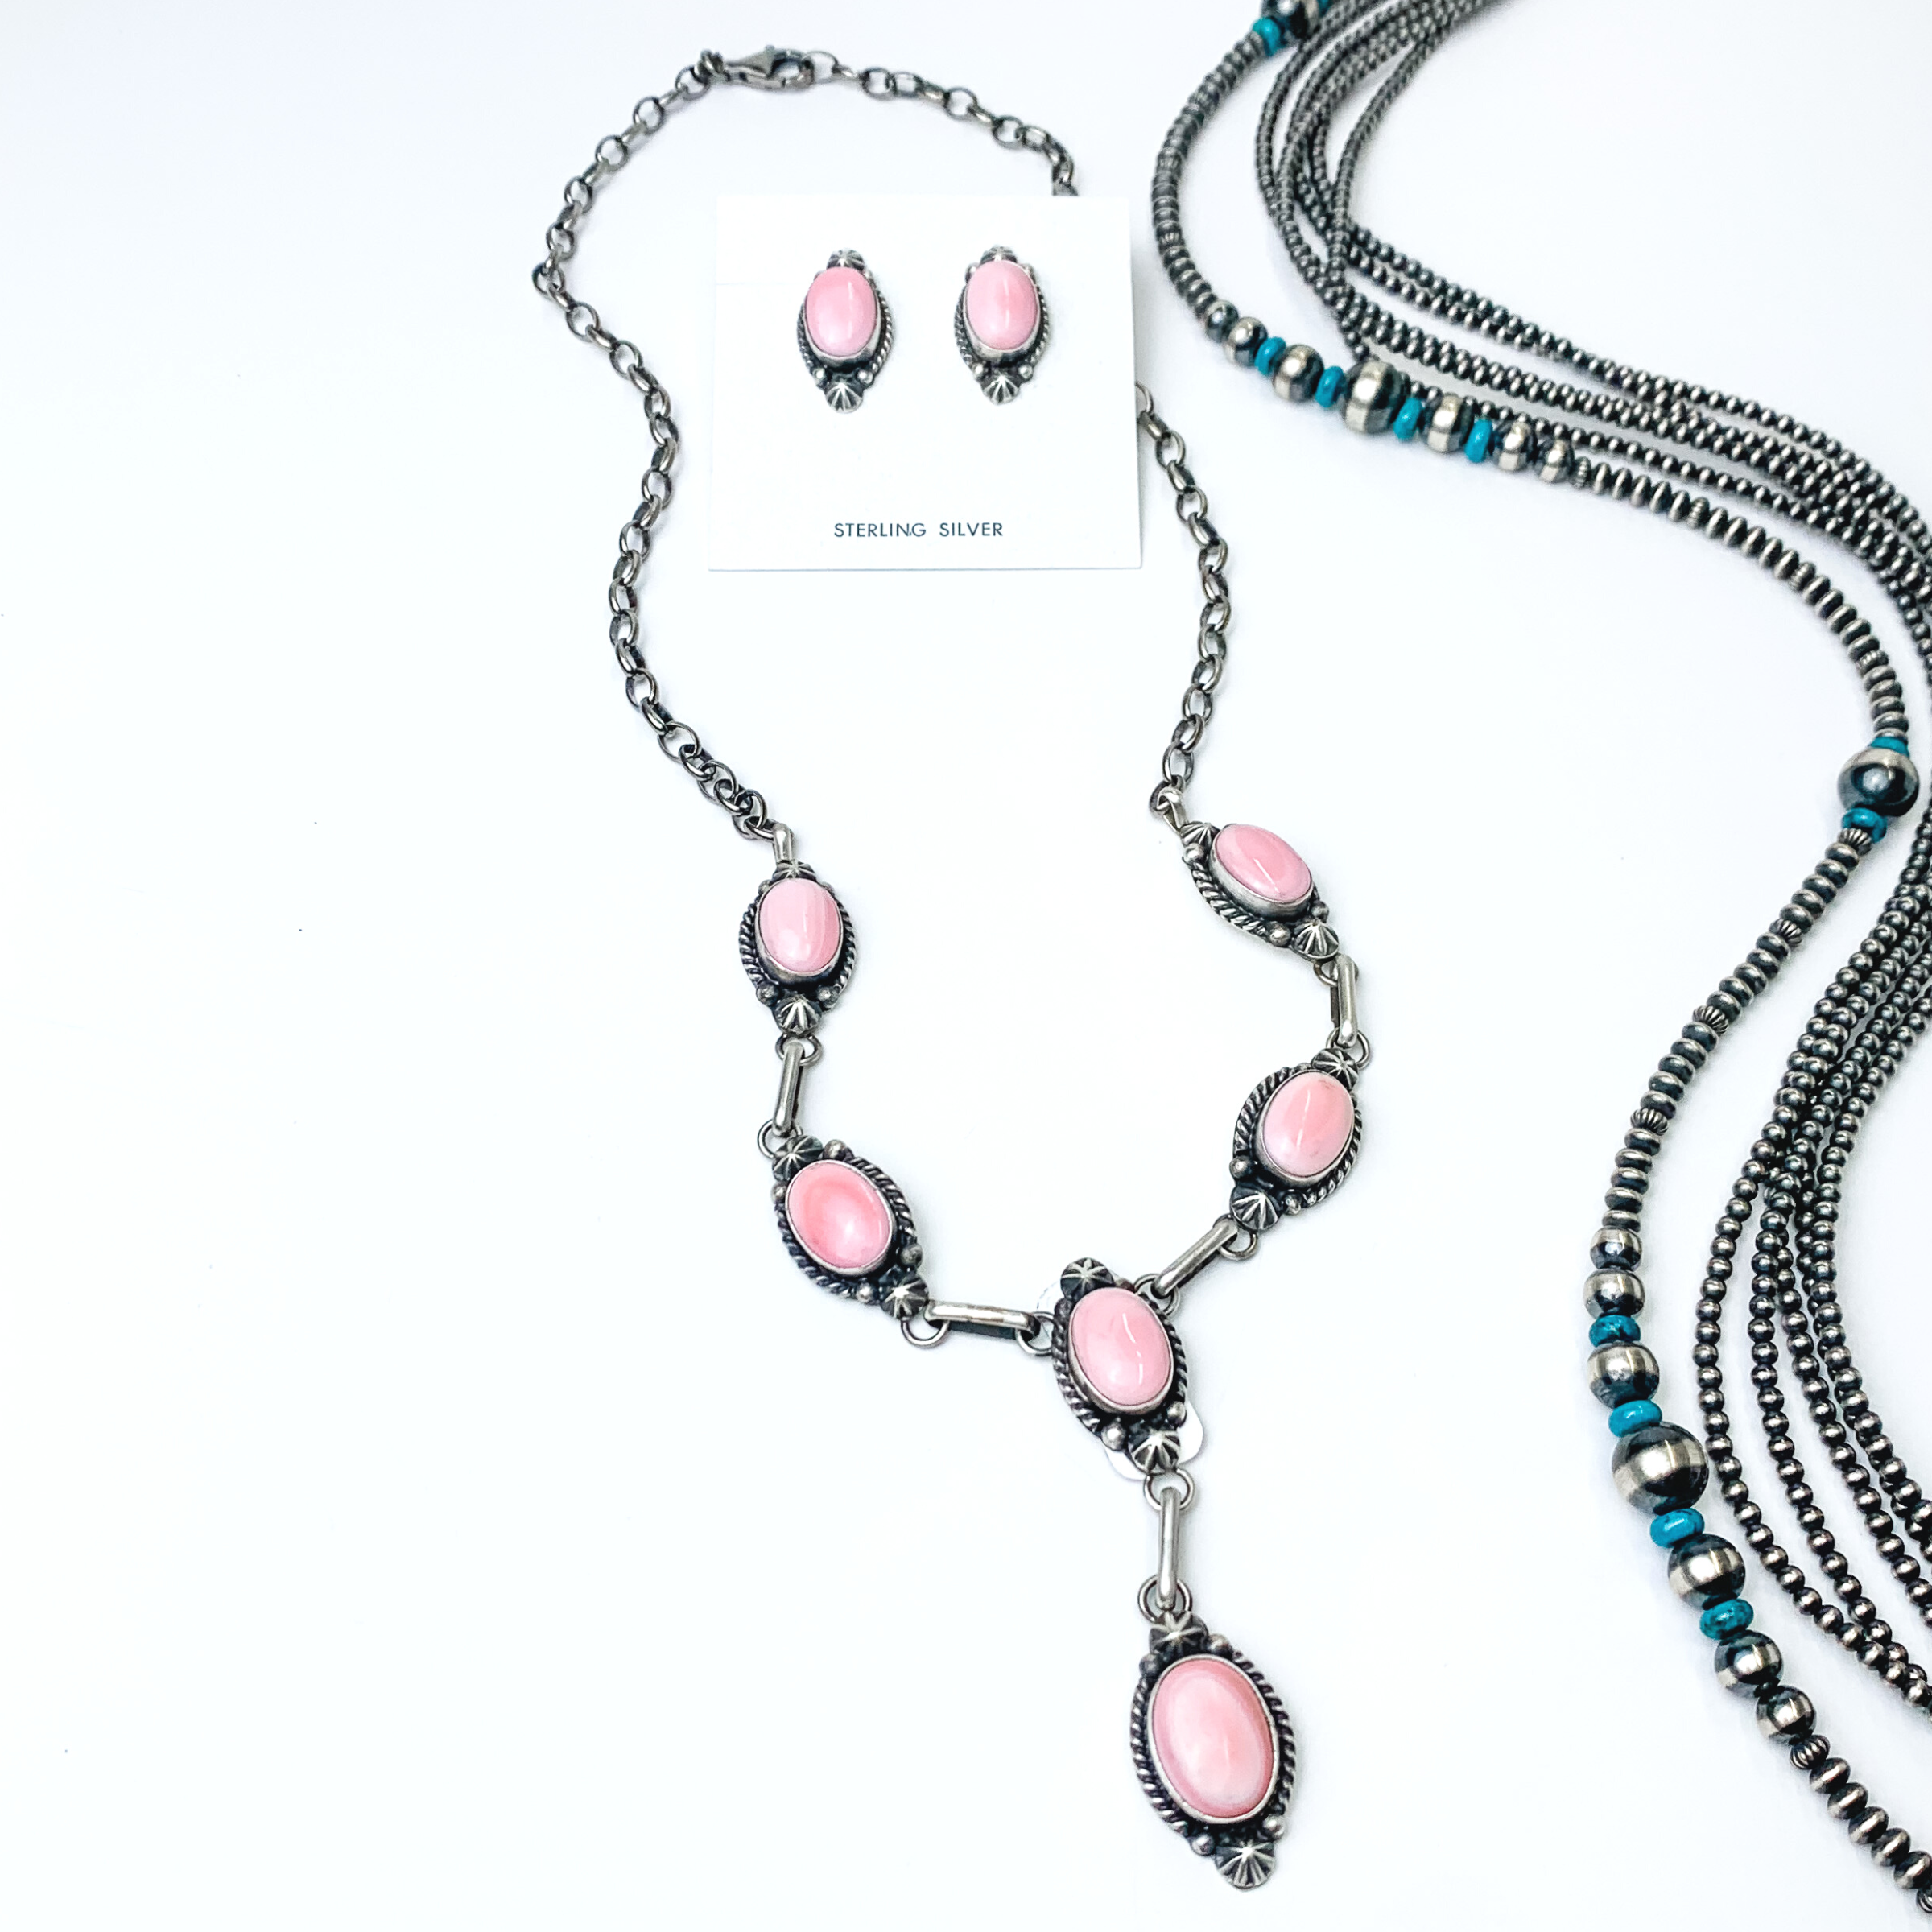 Pictured is a pink stone lariat necklace that includes six stones. There is also a pair of pink oval stones. This necklace set is pictured on a white background with silver beads to the right of the necklace. 